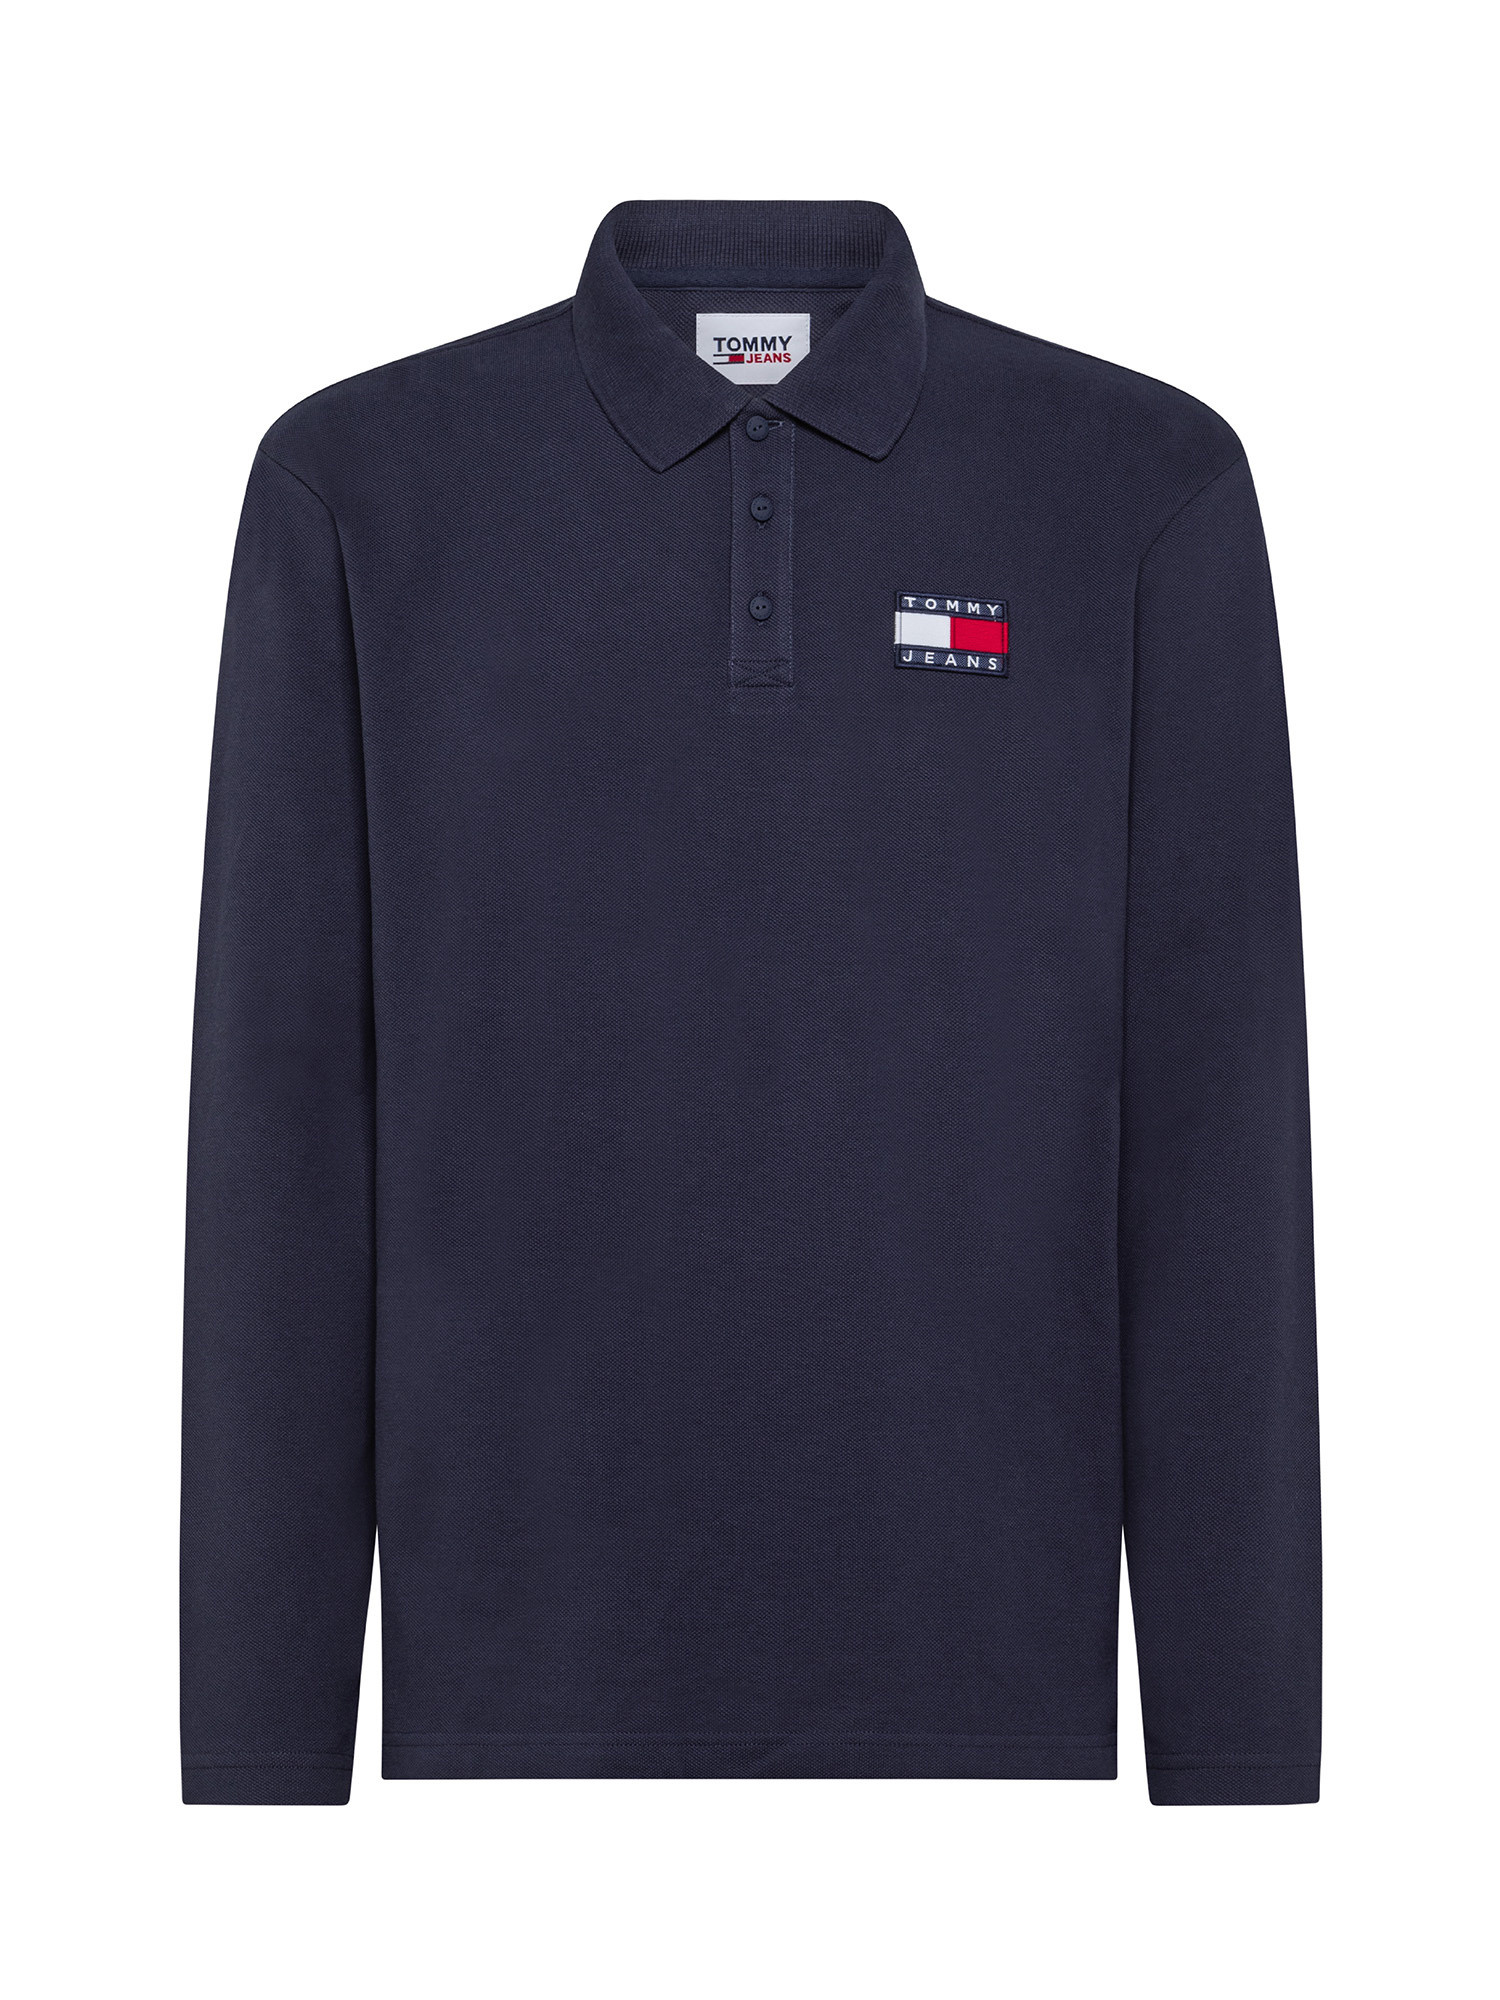 Tommy Jeans - Polo con logo slim fit, Blu scuro, large image number 0